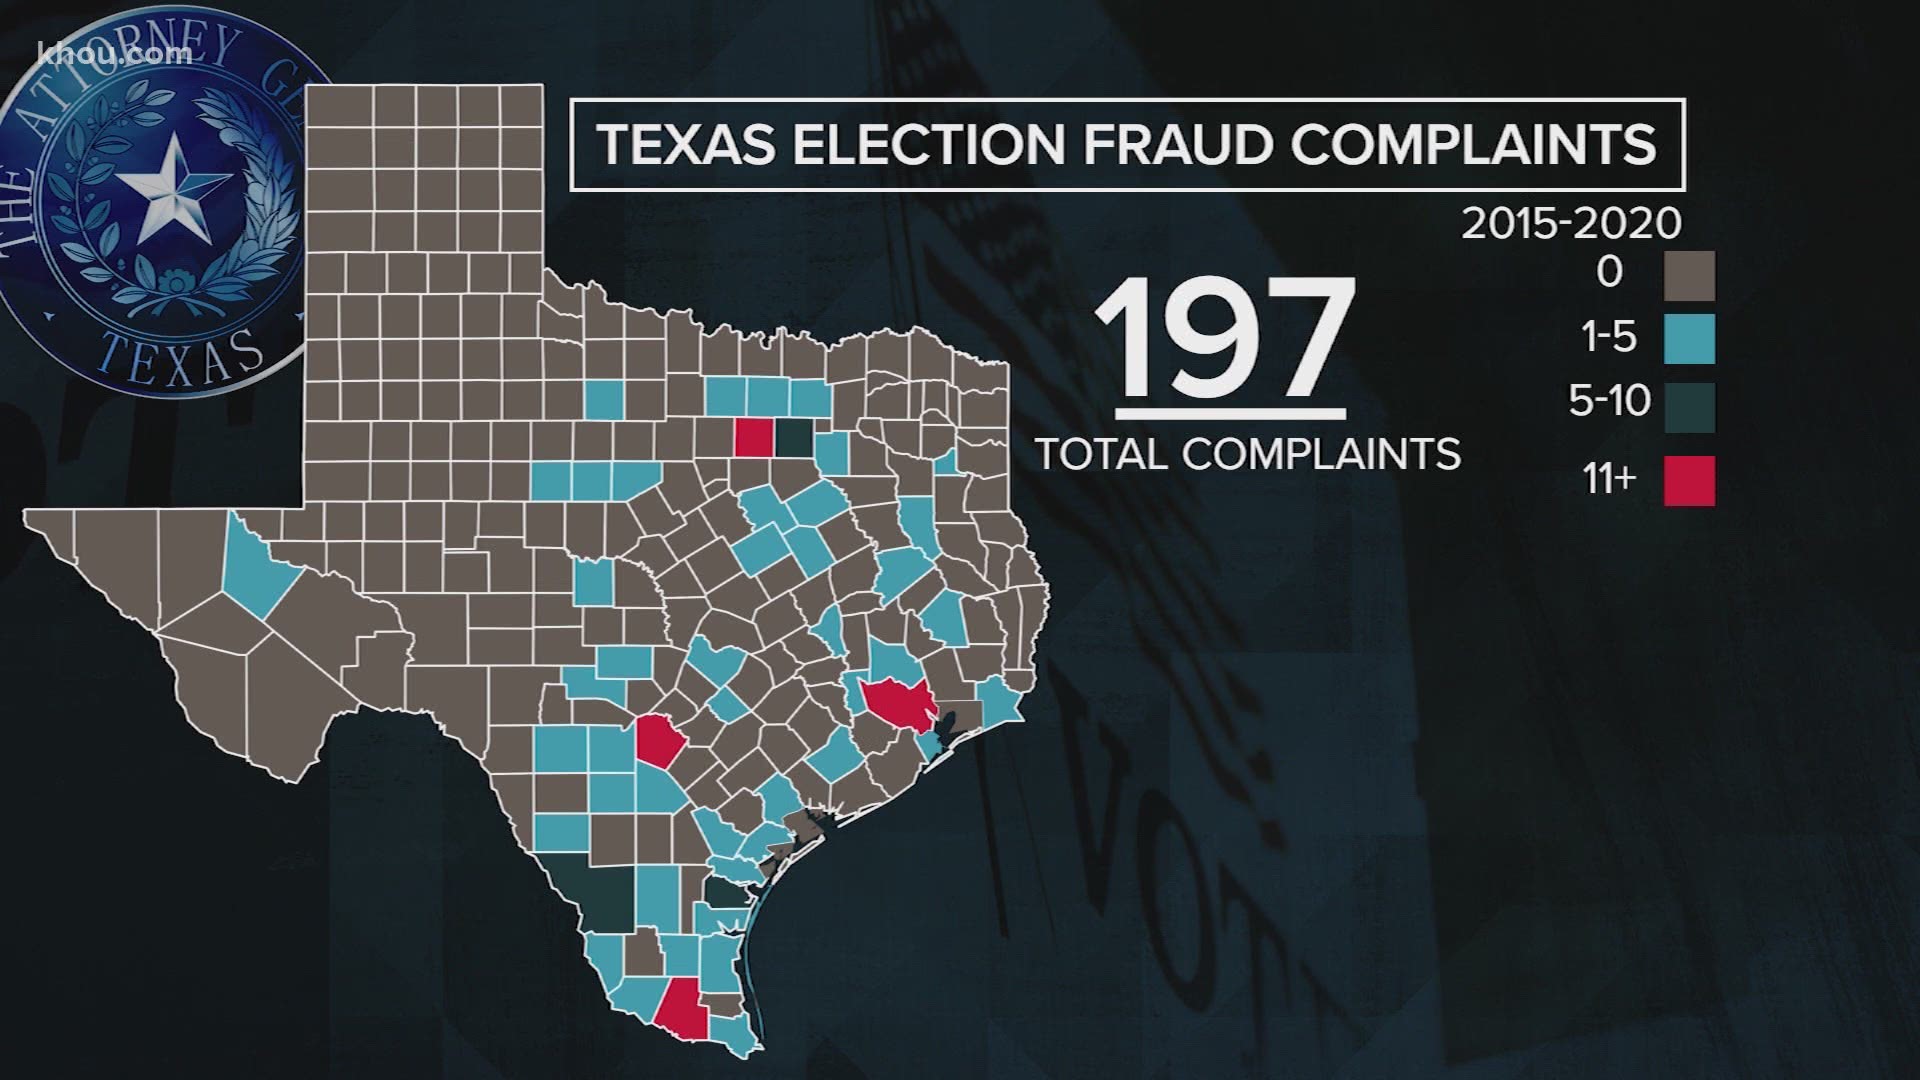 From 2015 to 2020, the Texas Attorney General’s office received 197 election fraud complaints across the state.